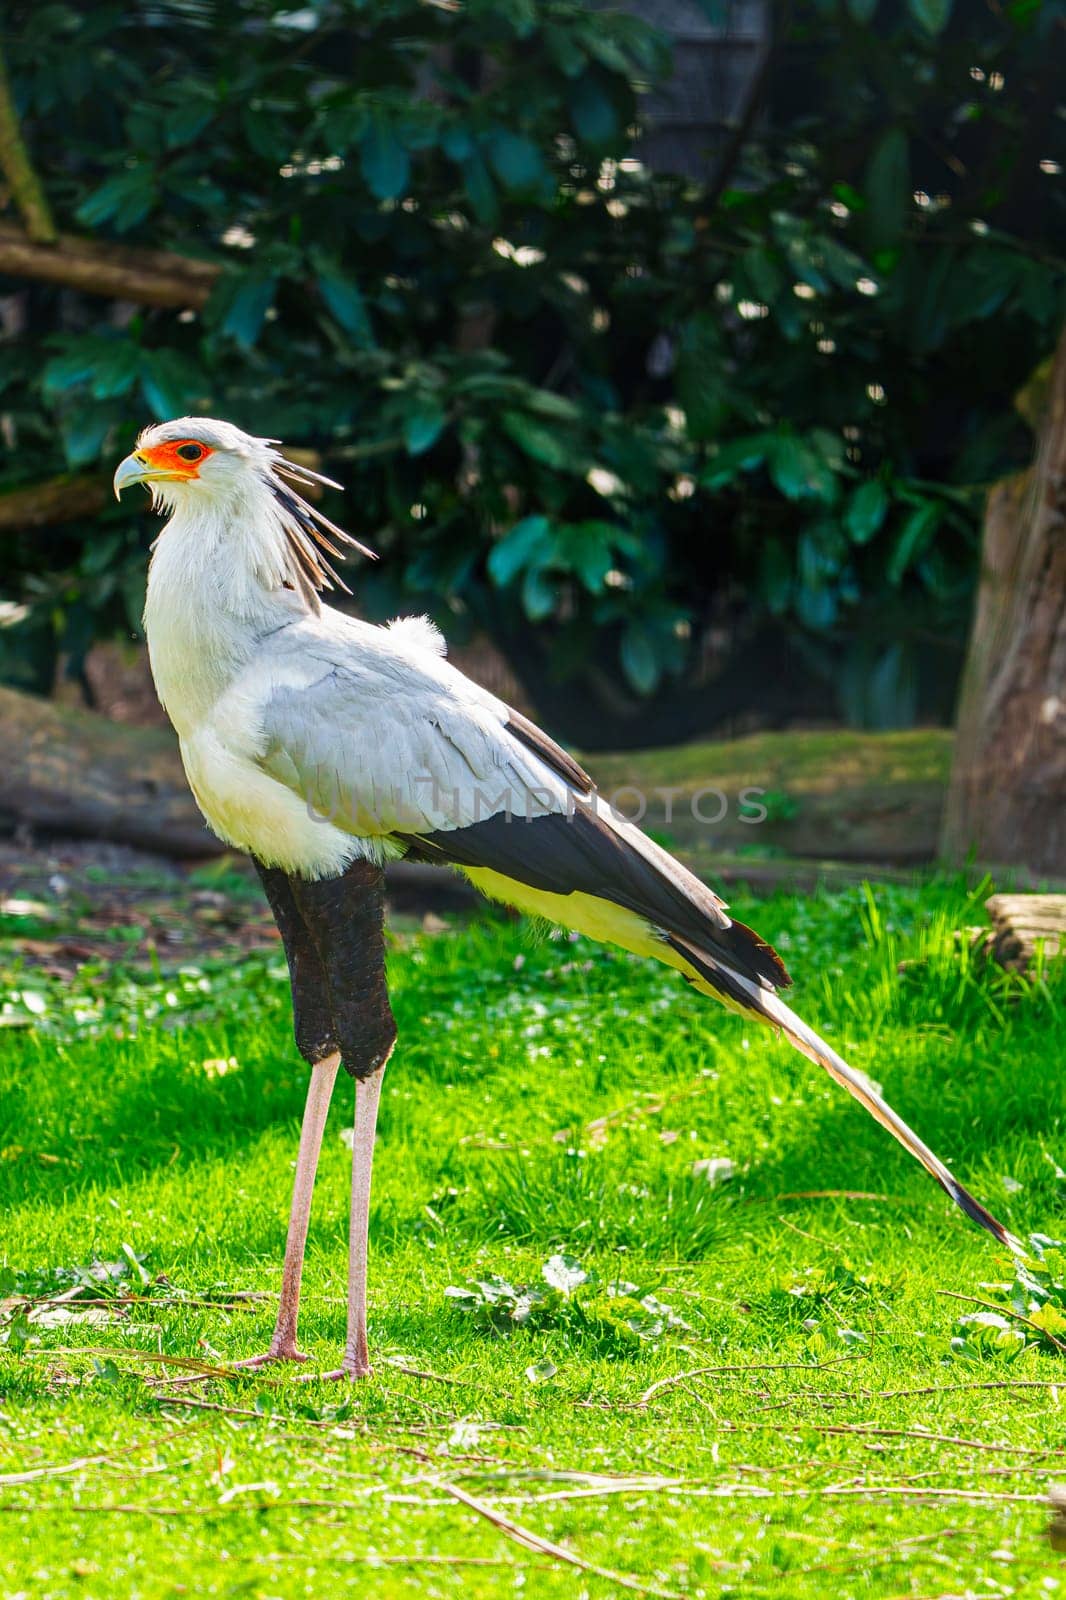 Detailed Close-up Shot of Secretary Bird in Its Natural Environment by PhotoTime